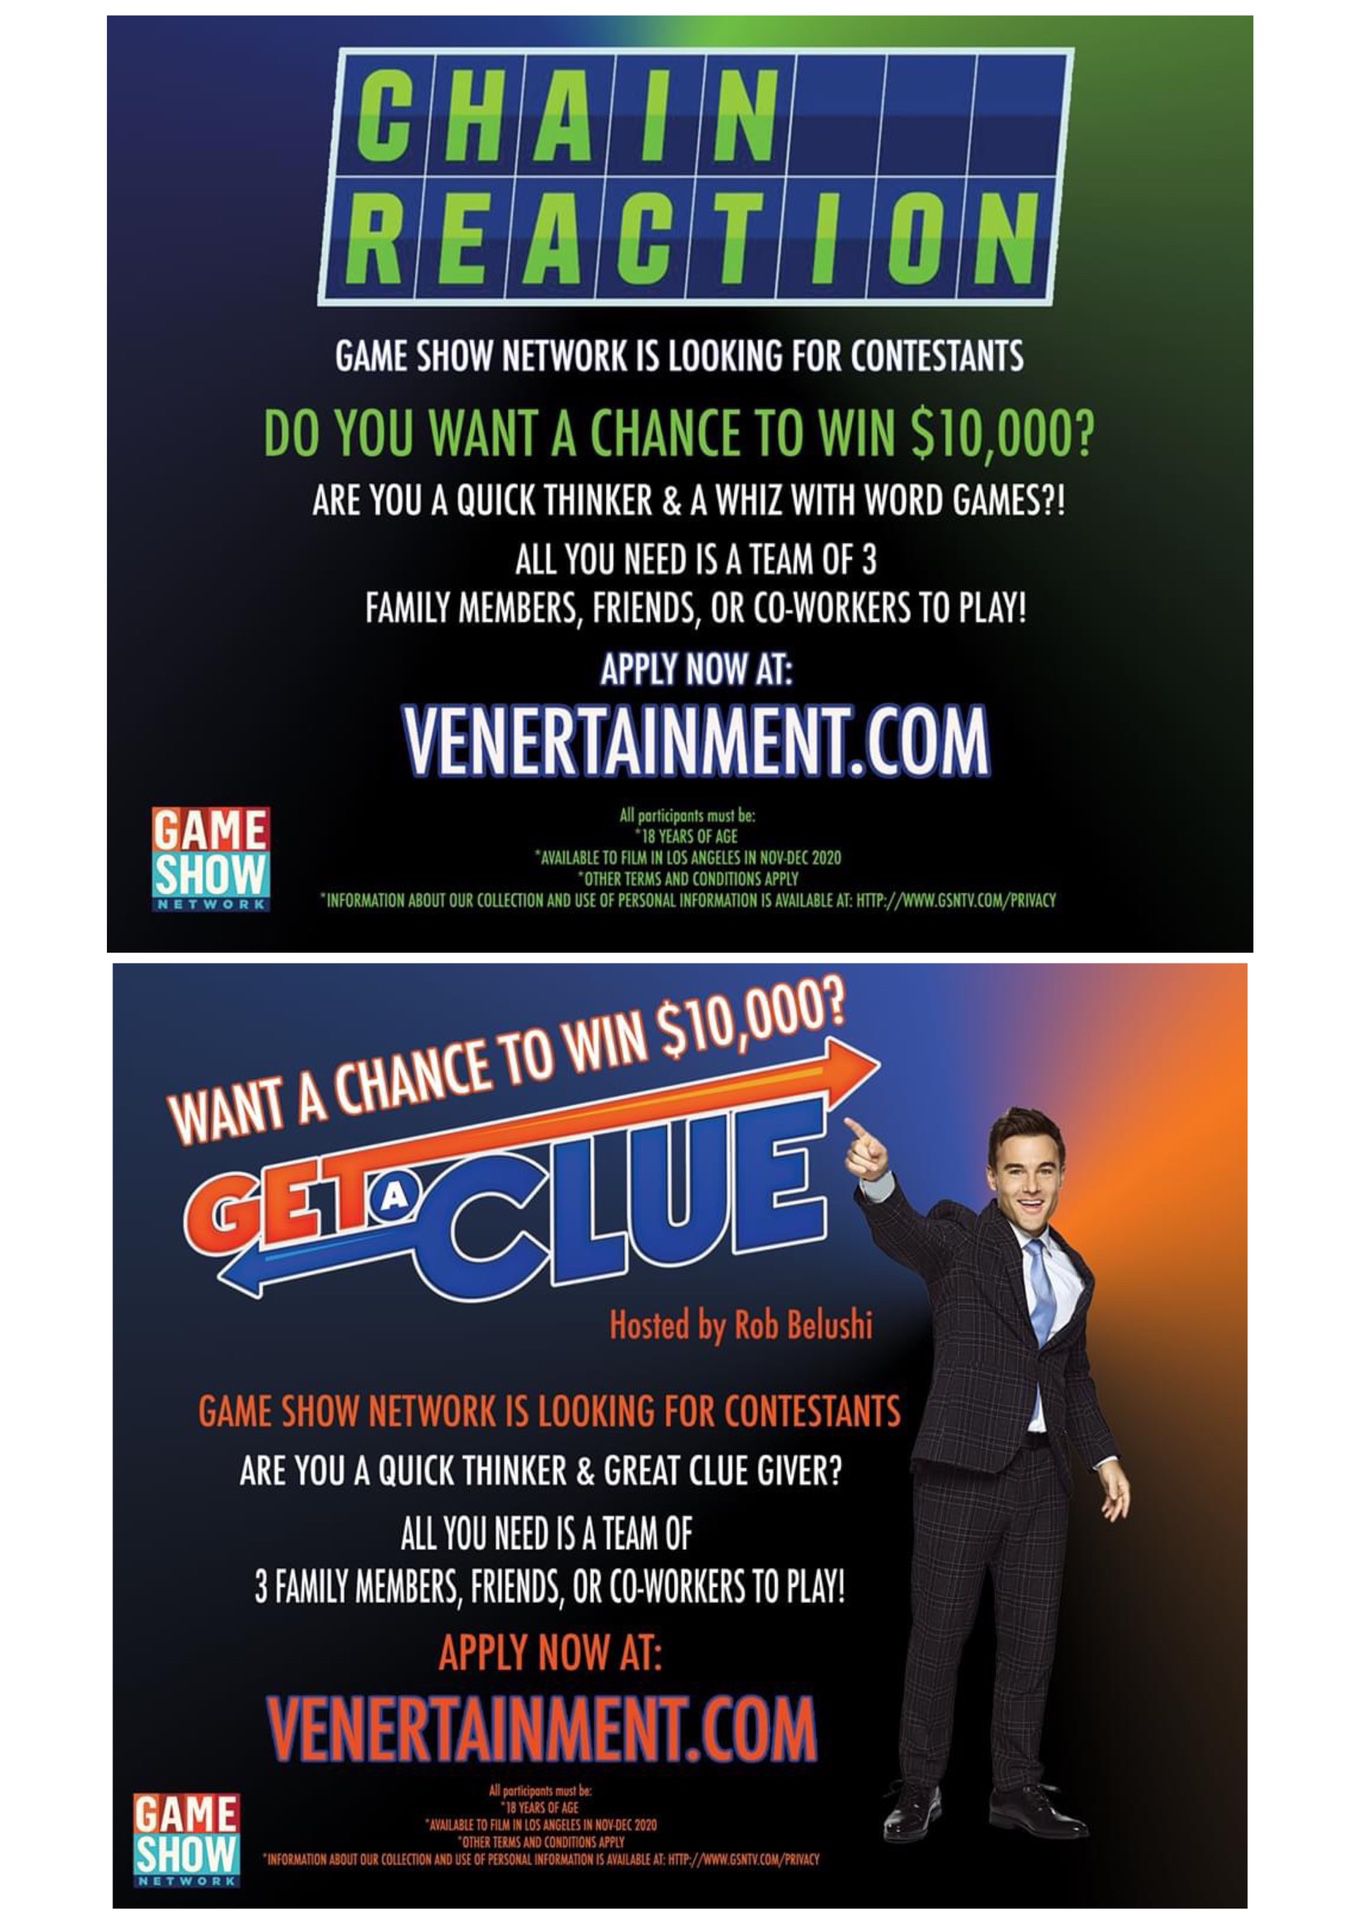 GAME SHOW CASTING SoCal LOCALS!